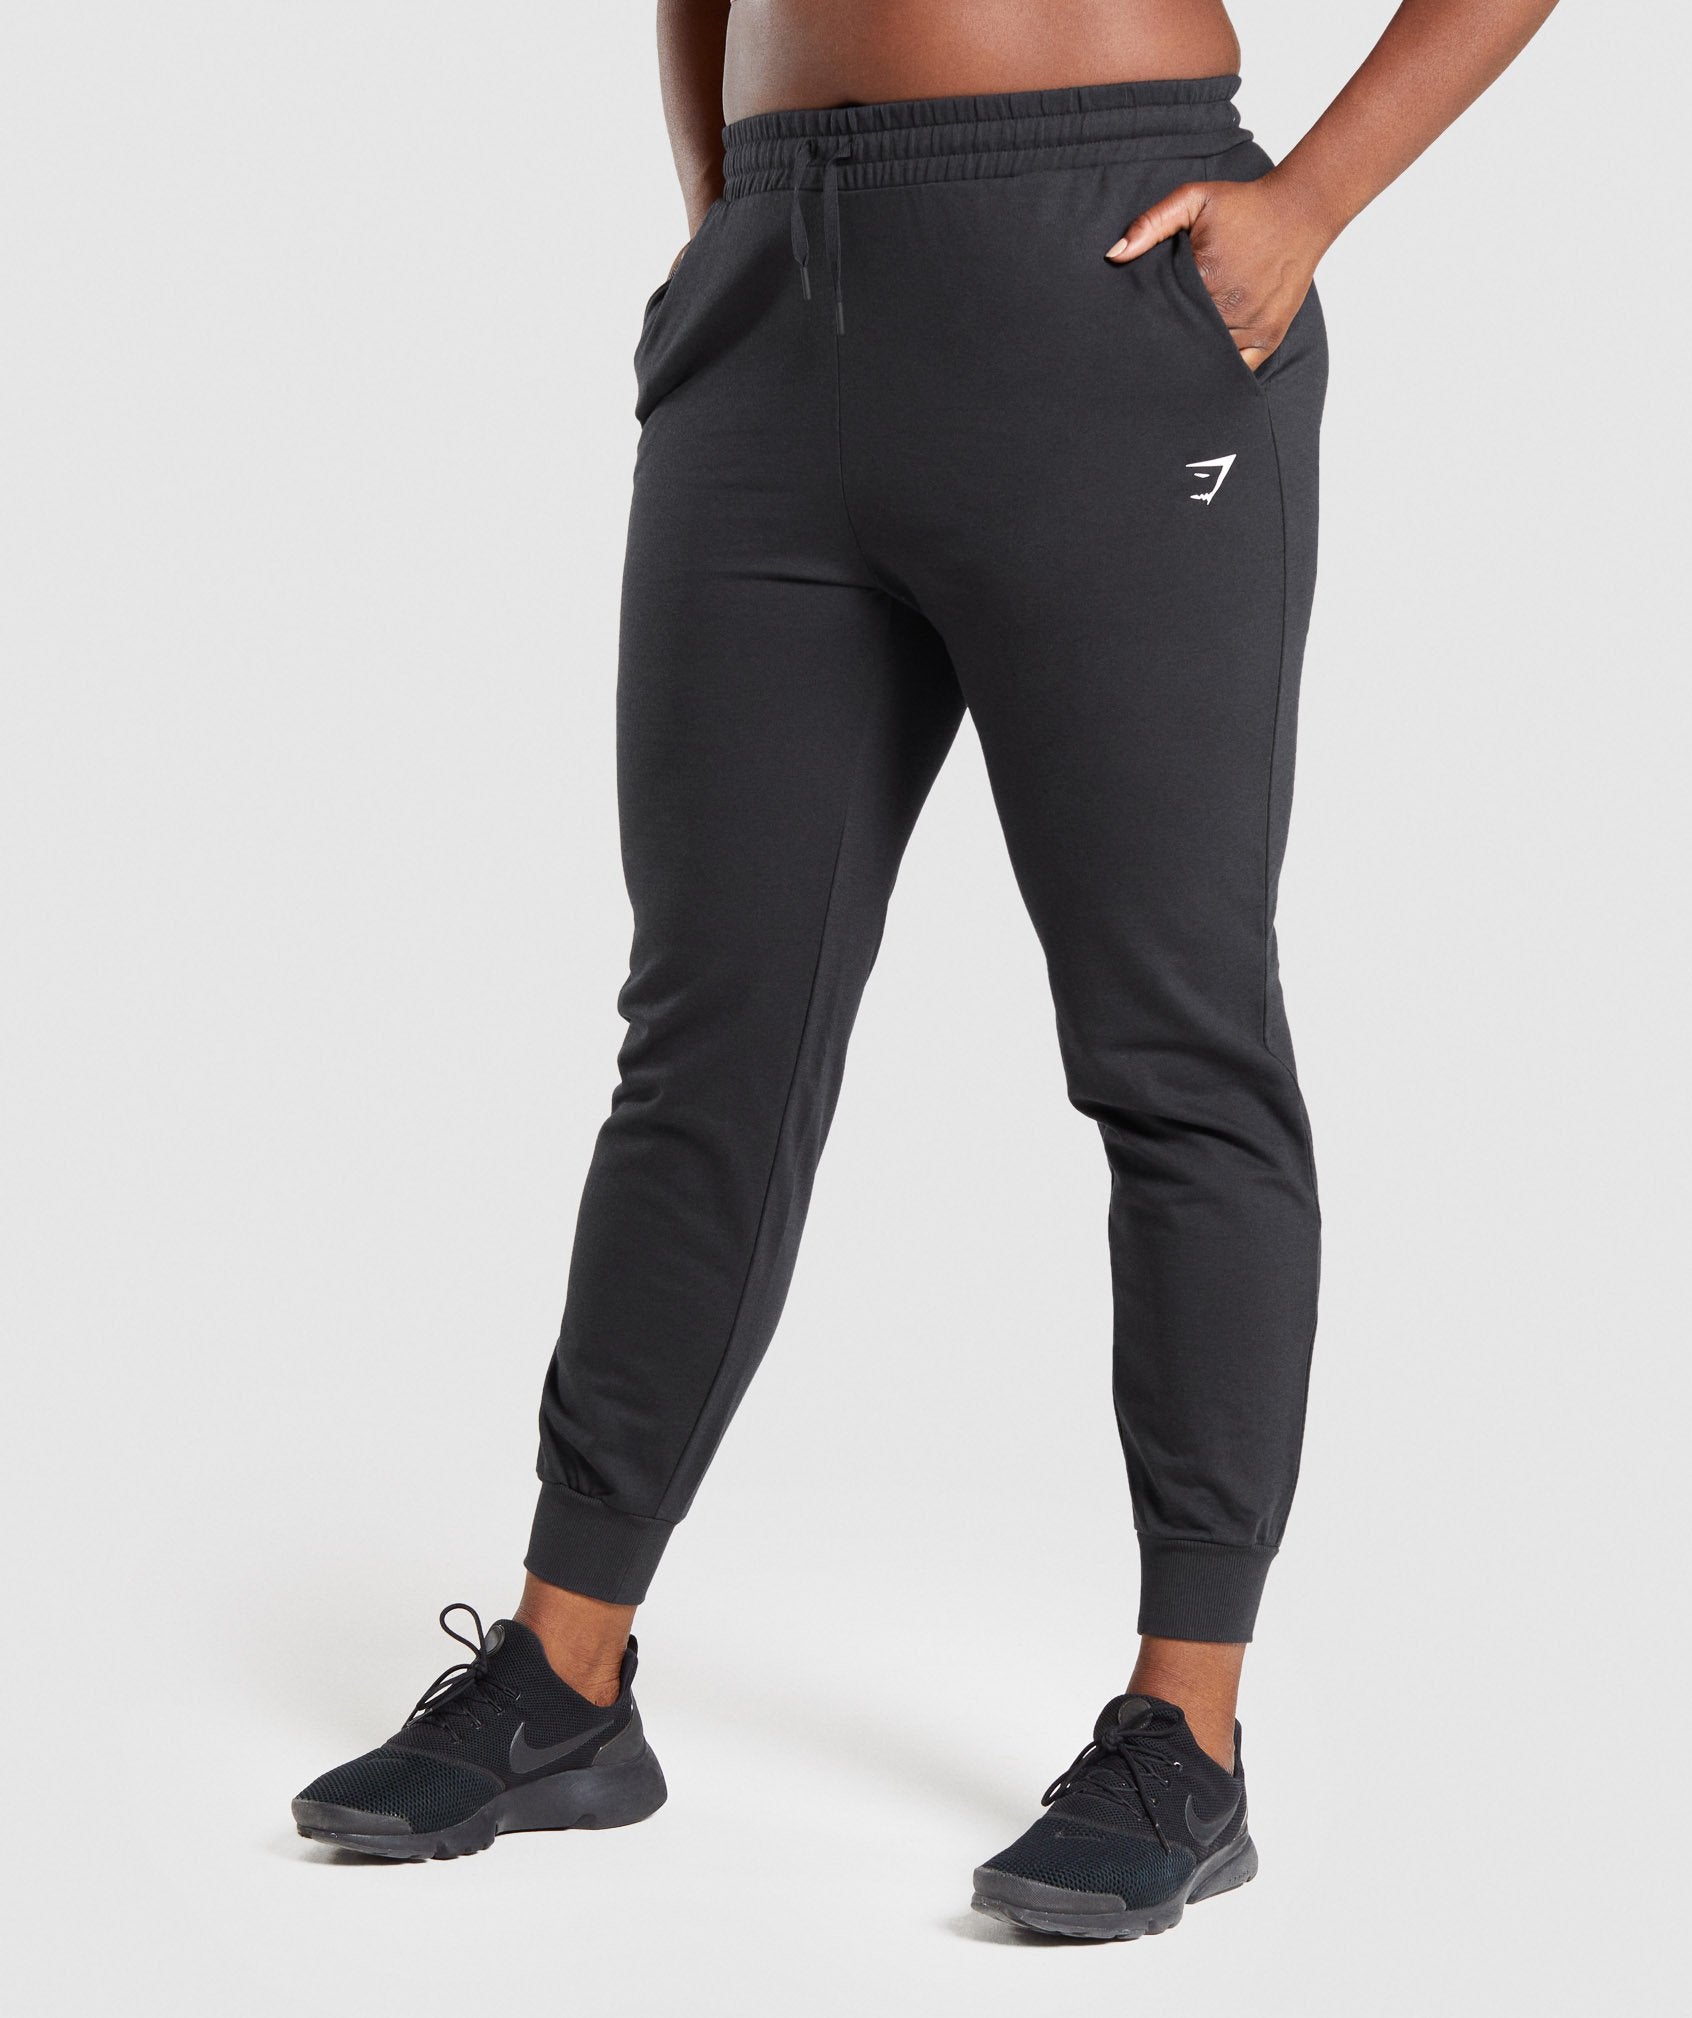 Gymshark Pippa Joggers Red Size XS - $38 New With Tags - From Nika